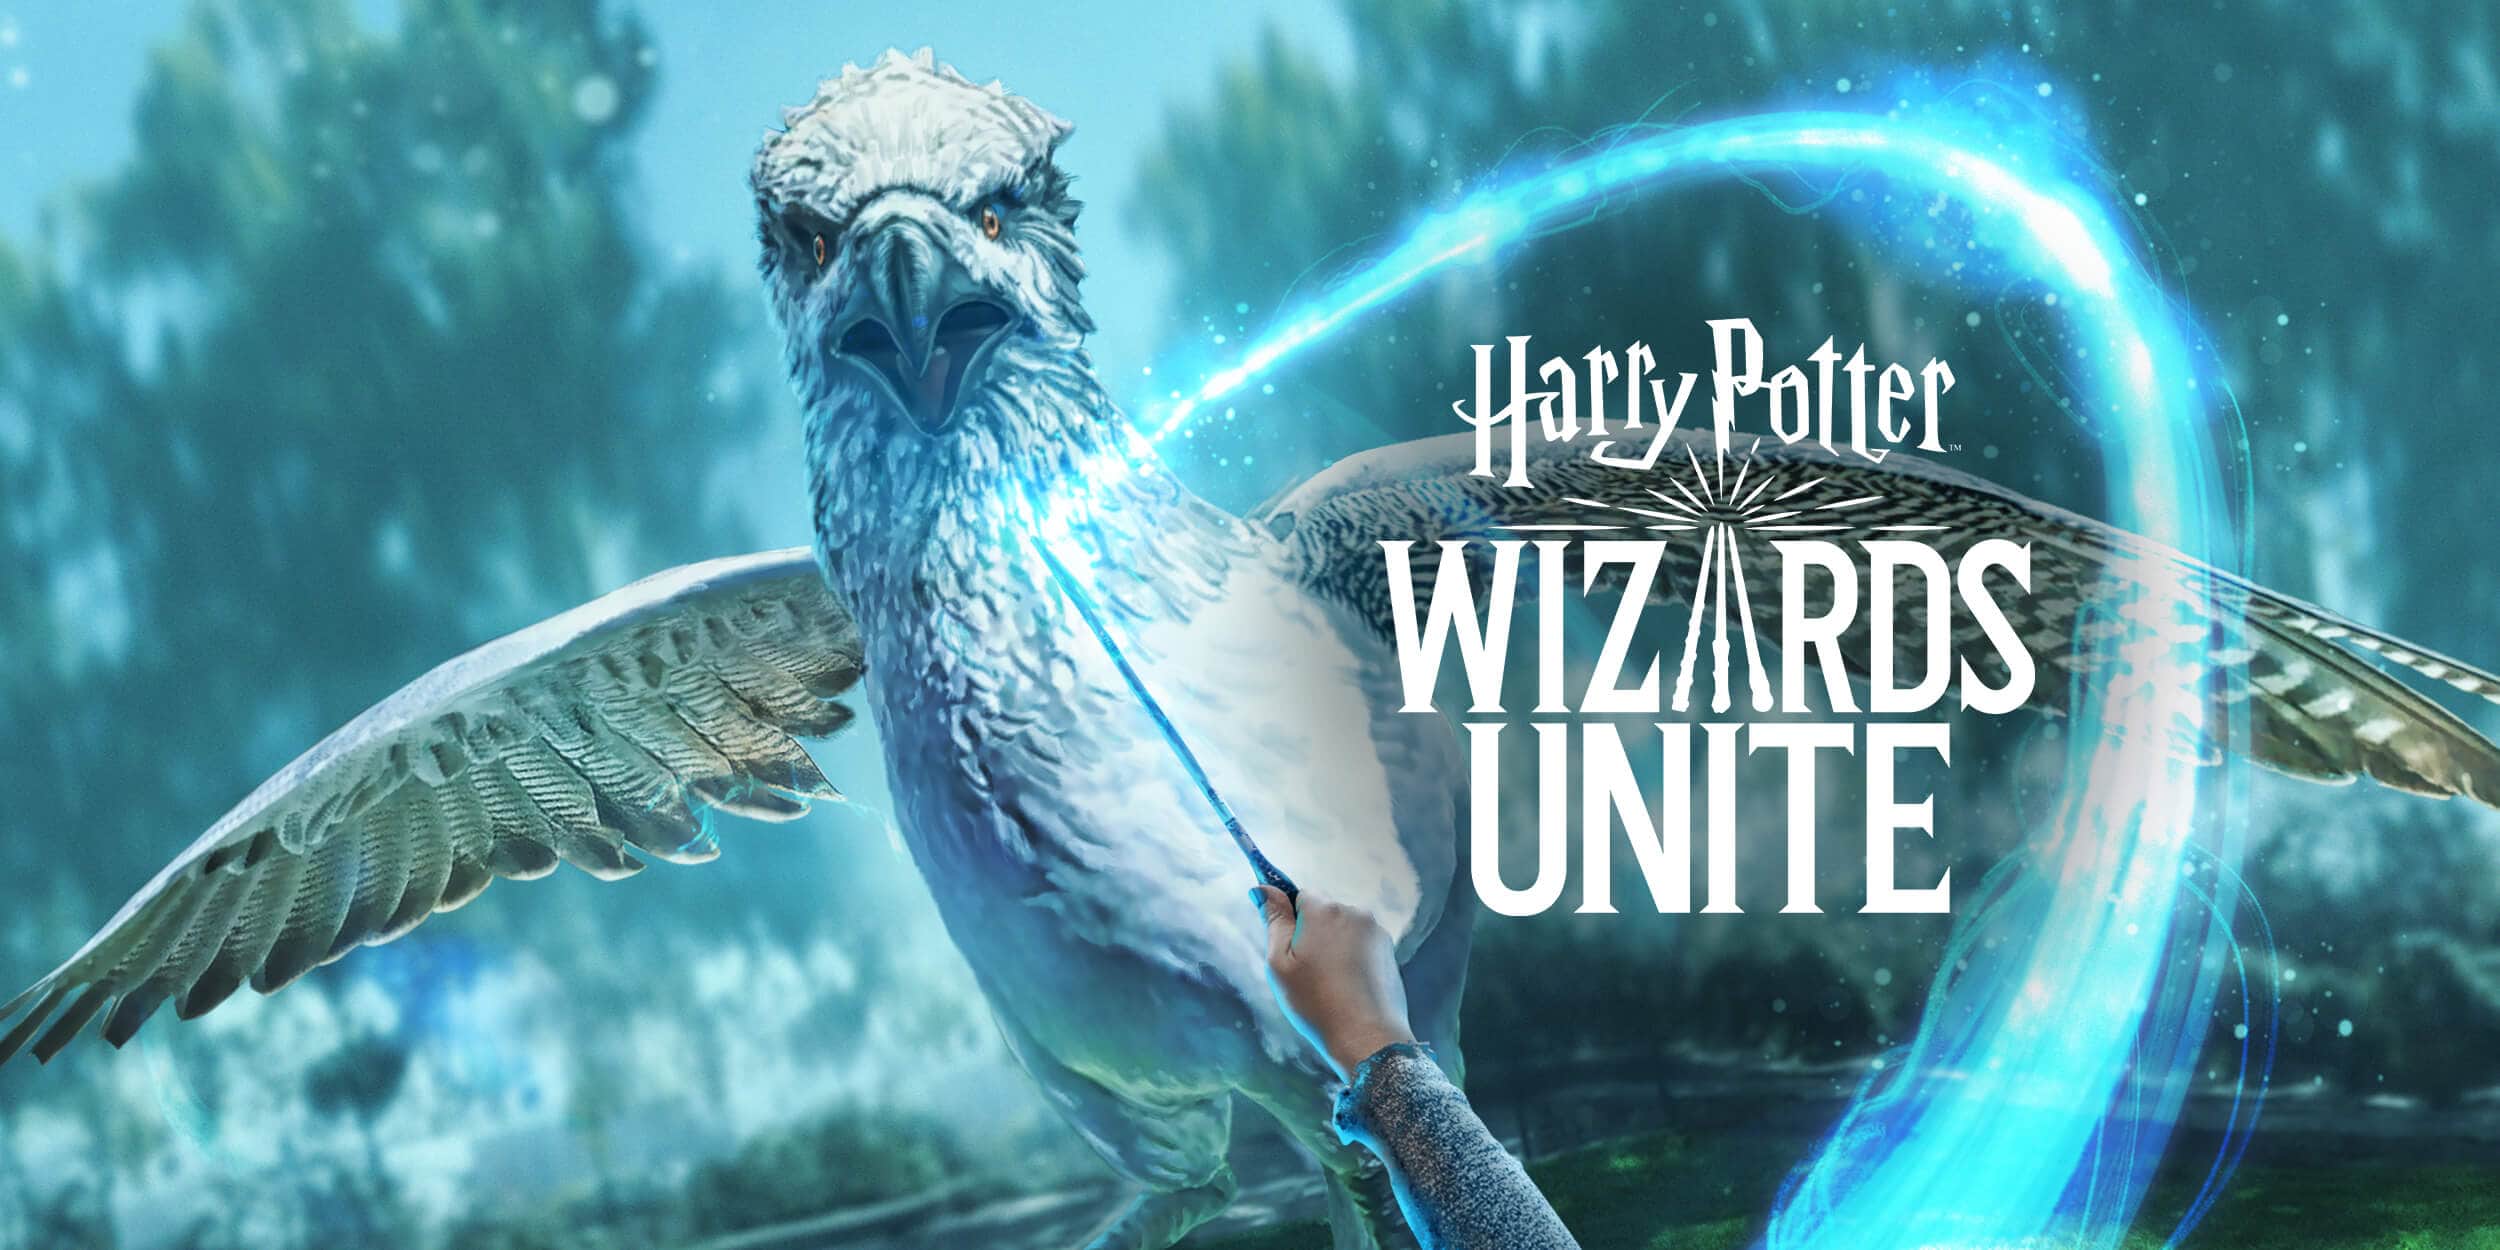 The first AR Harry Potter game promises spell casting in the real world